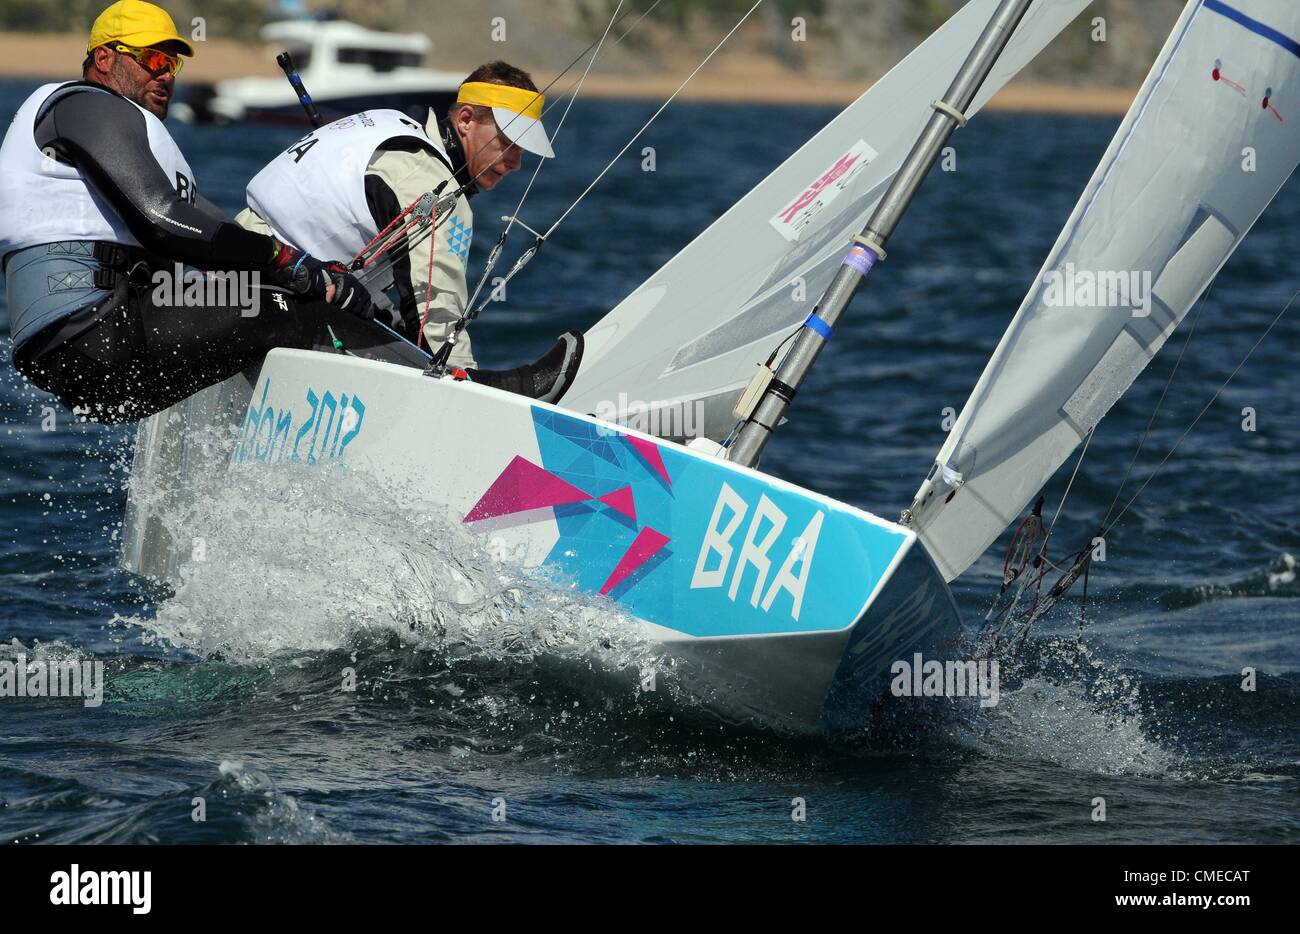 Olympic Sailing, action during the London 2012 Olympic Games at the Weymouth & Portland Venue, Dorset, Britain, UK.  Bruno Prada and Robert Scheidt of Brazil in action during the Star Class race, July 29, 2012 PICTURE: DORSET MEDIA SERVICE Stock Photo